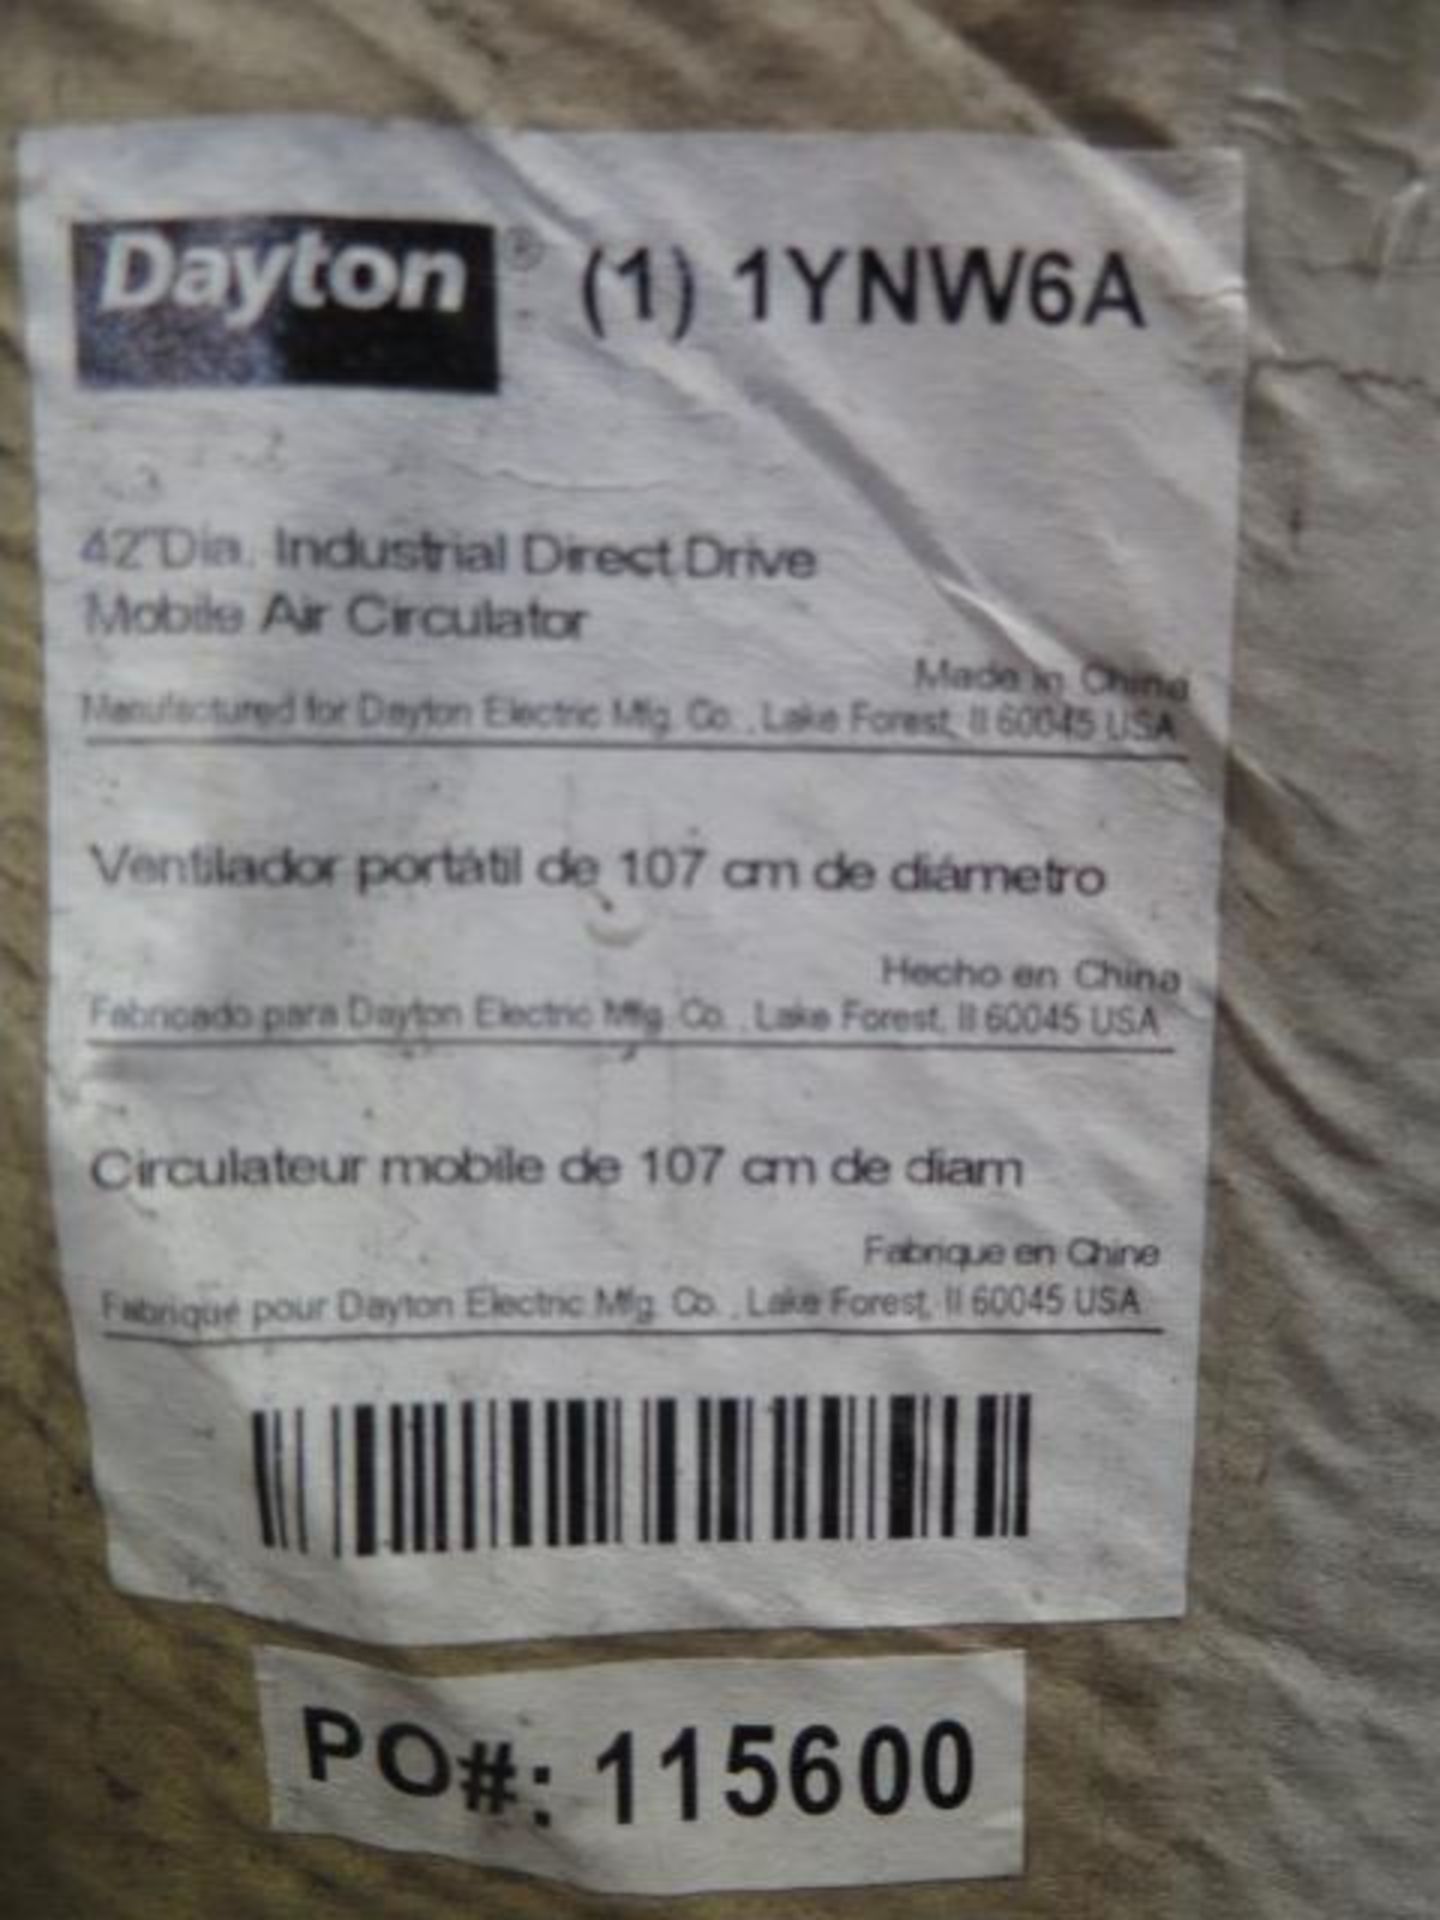 Dayton 42" Shop Fans (2 - NEW) (SOLD AS-IS - NO WARRANTY) - Image 4 of 4